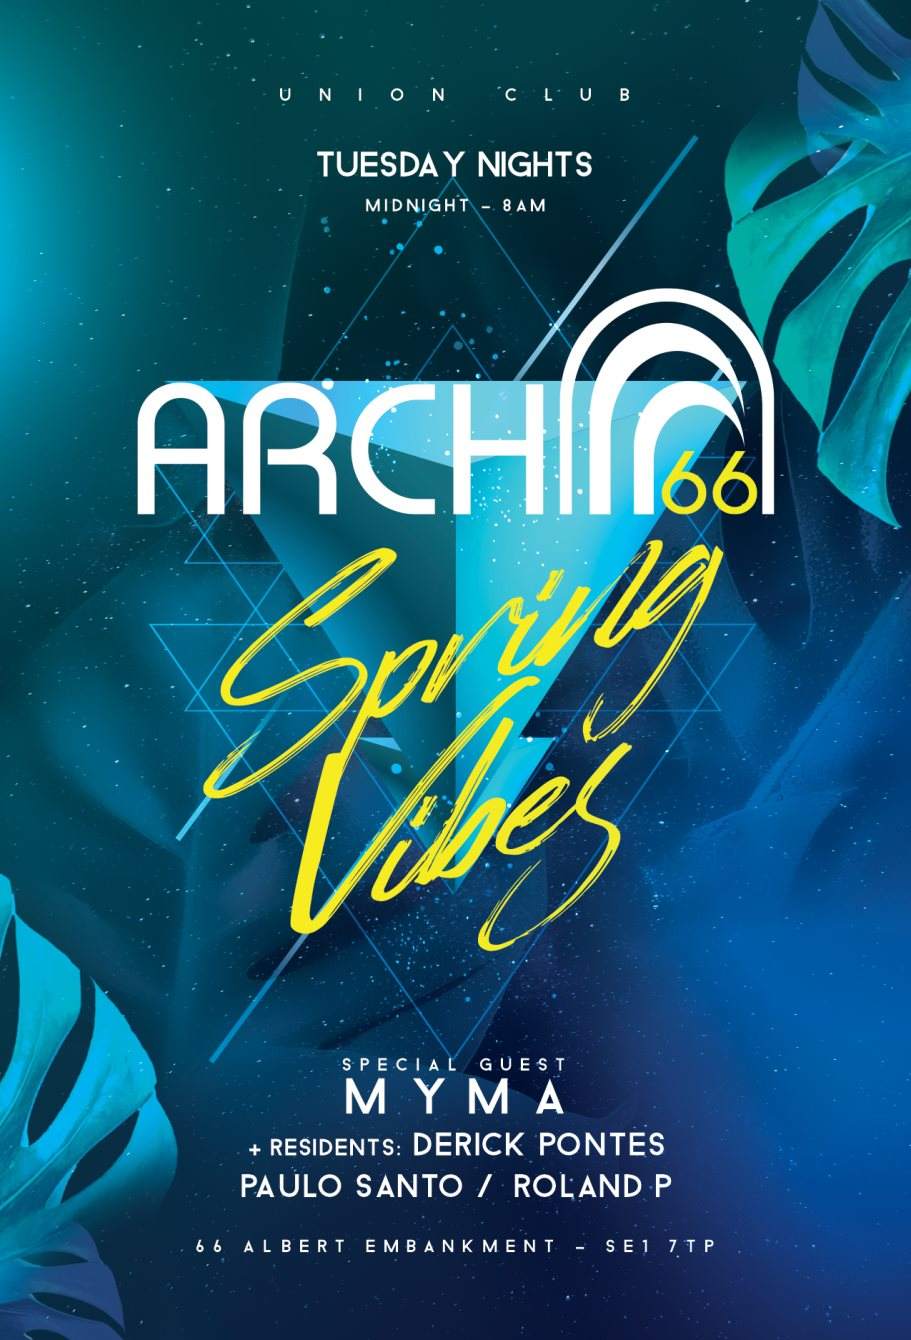 ARCH66 - with Myma - Tuesday Night Afterhours (House - Disco - Techhouse) - Página frontal